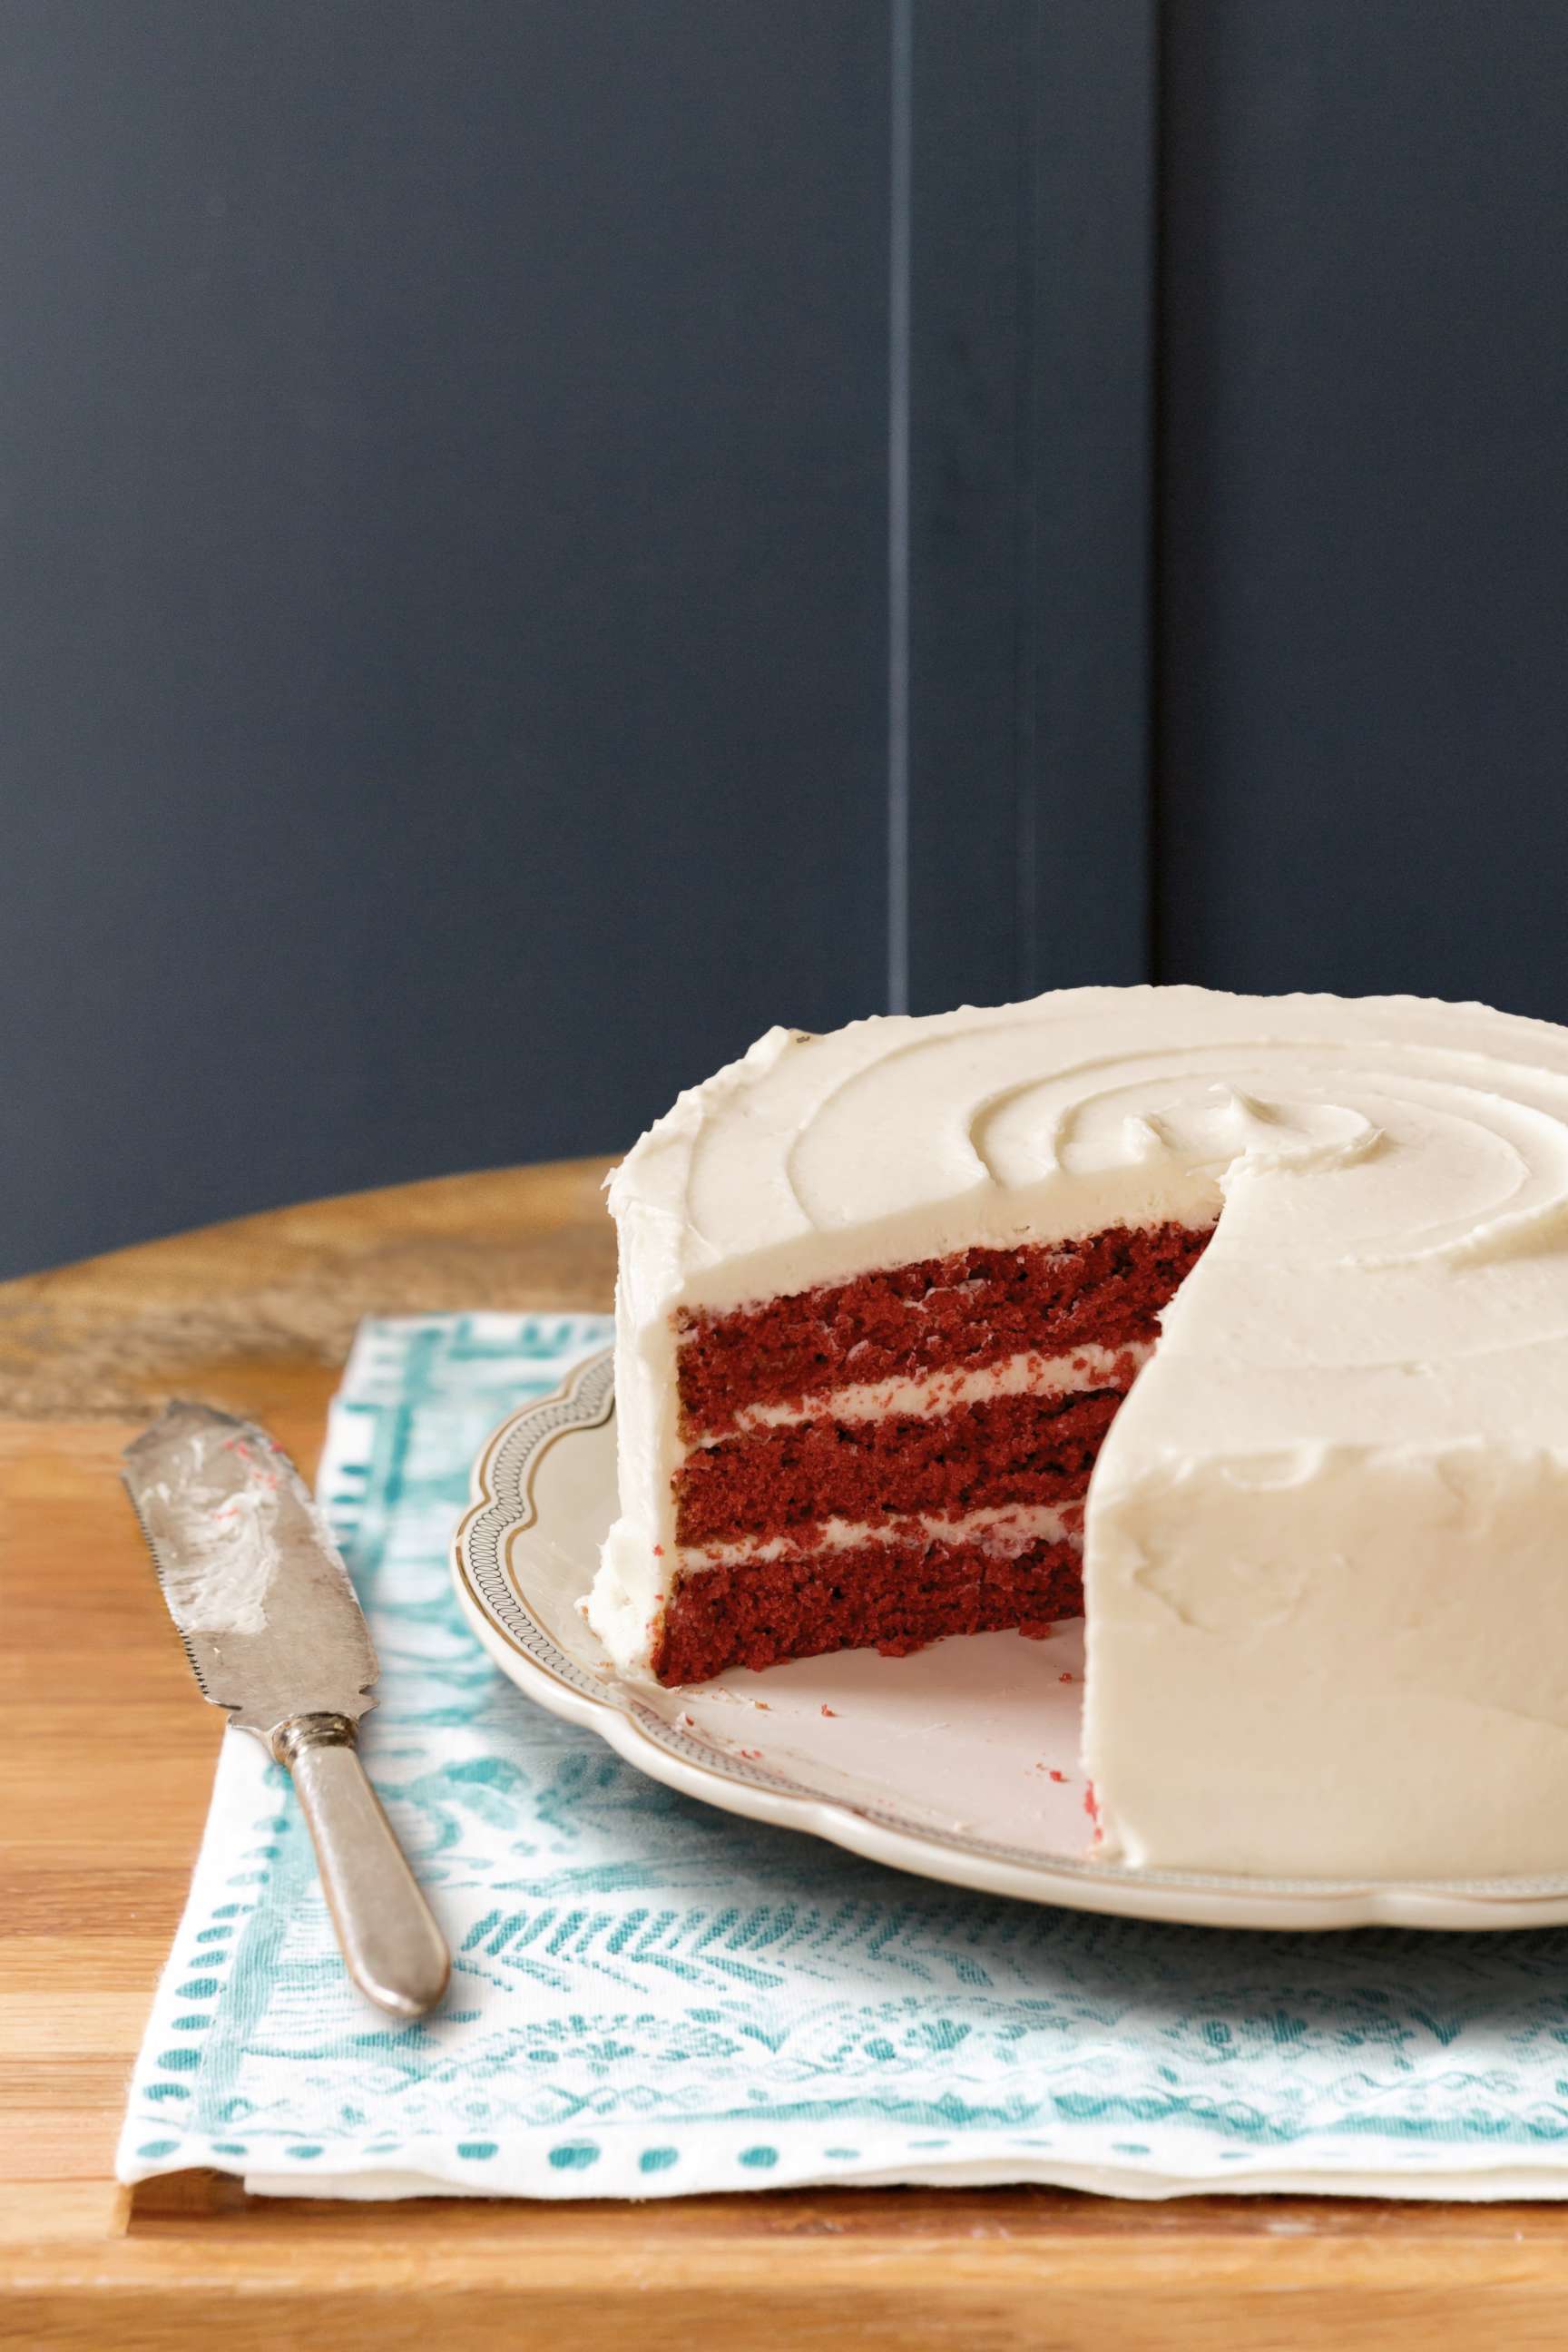 PHOTO: Kim Nelson's red velvet cake from her new cookbook "Daisy Cakes Bakes: Keepsake Recipes for Southern Layer Cakes, Pies, Cookies, and More."